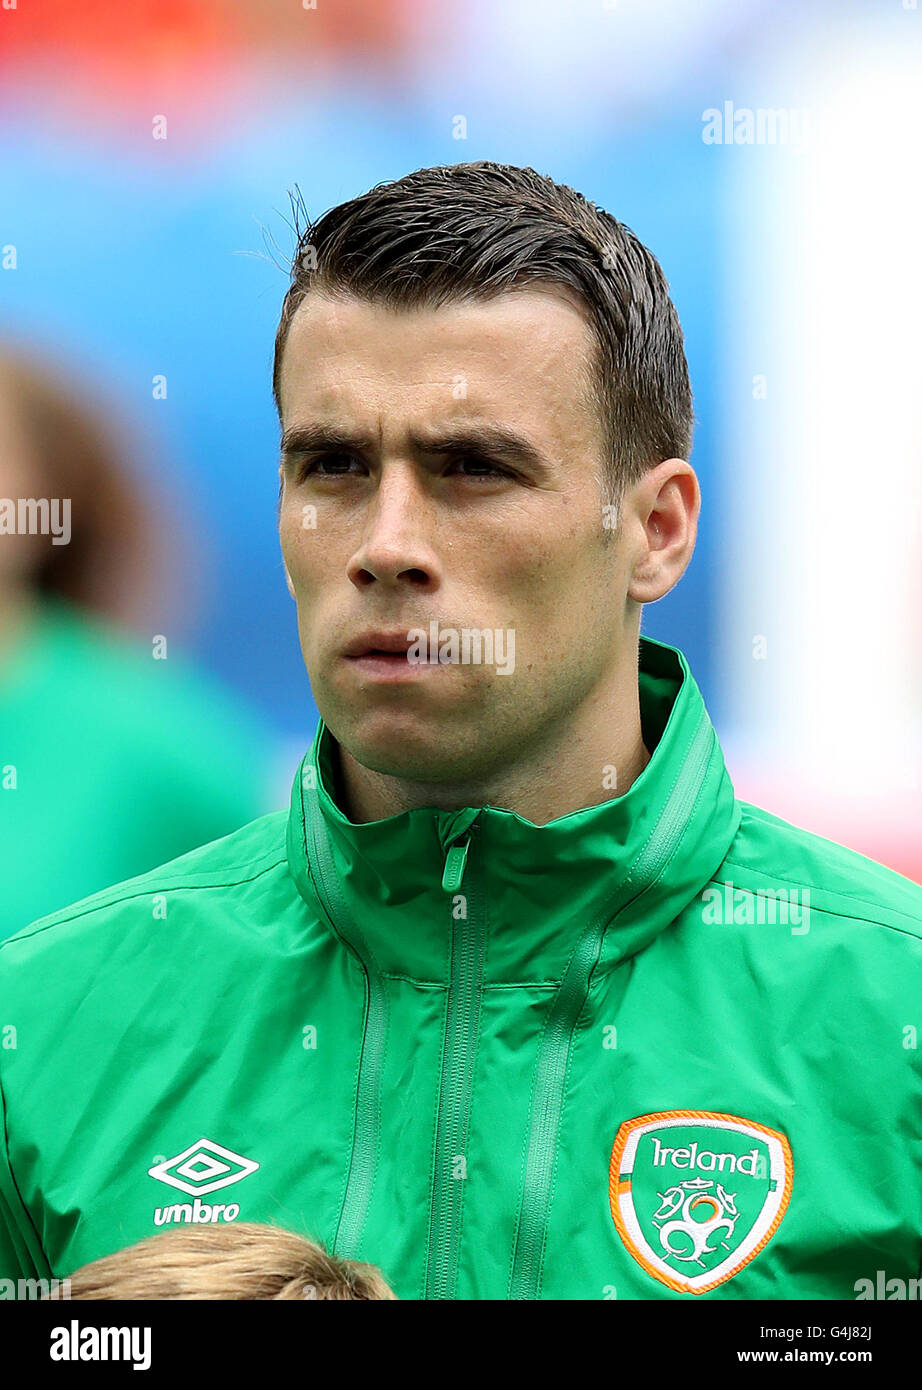 Republic Of Ireland S Seamus Coleman During The Uefa Euro 16 Group E Match At The Stade De Bordeaux Bordeaux Press Association Photo Picture Date Saturday June 18 16 See Pa Story Soccer